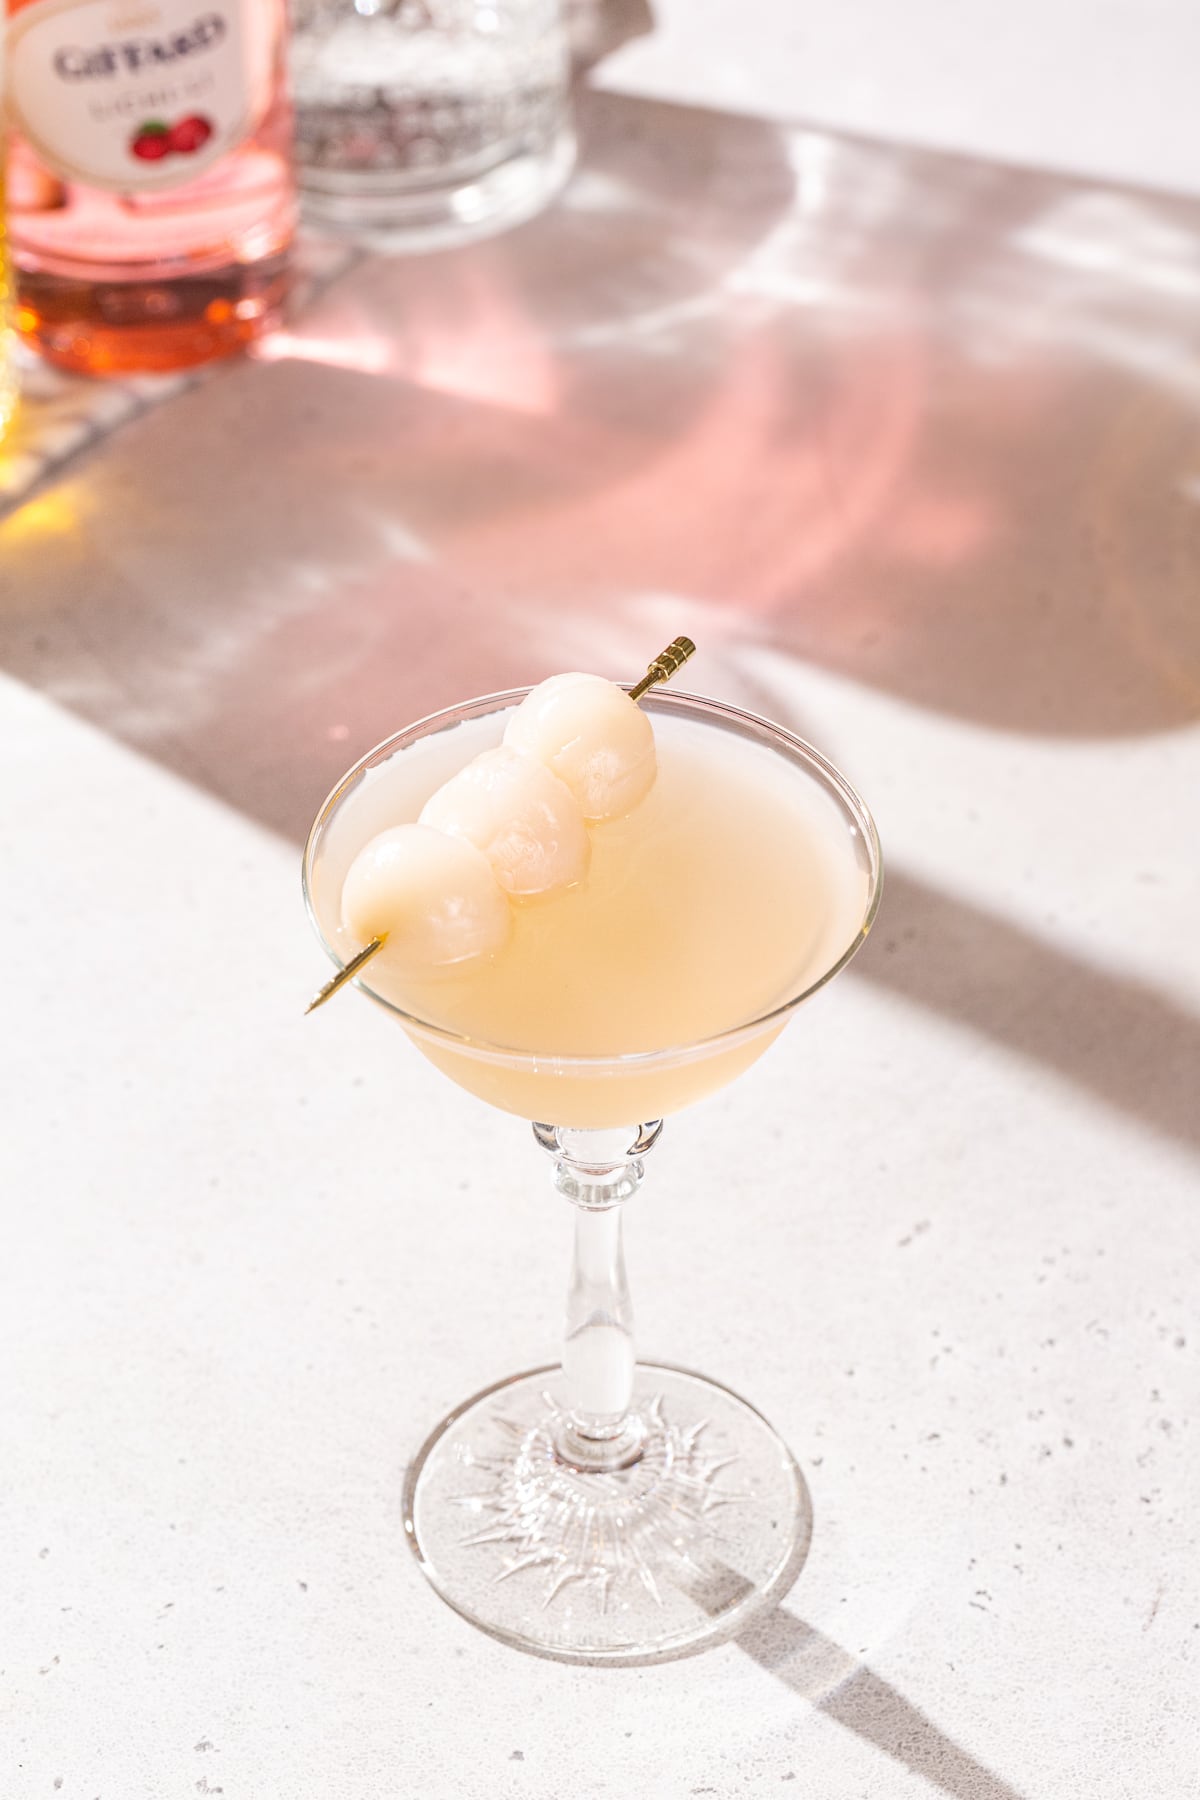 Slightly overhead view of a Lychee gin martini in a coupe glass. In the background you can see part of a bottle of gin and a bottle of lychee liqueur.